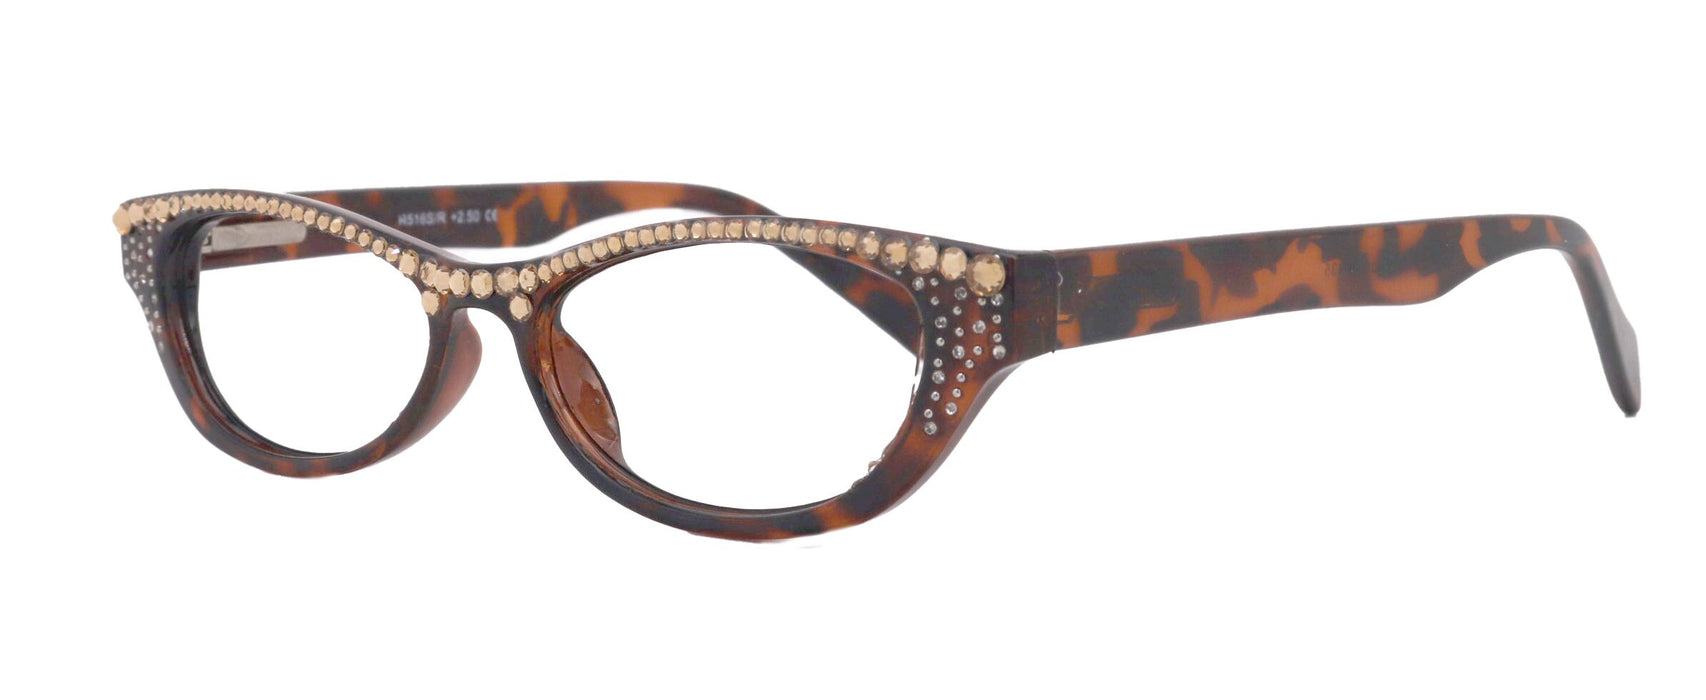 Bling Cat Eyes, Women Reading Glasses Adorned W Light Colorado Genuine European Crystals ( Brown) Frame, NY Fifth Avenue.